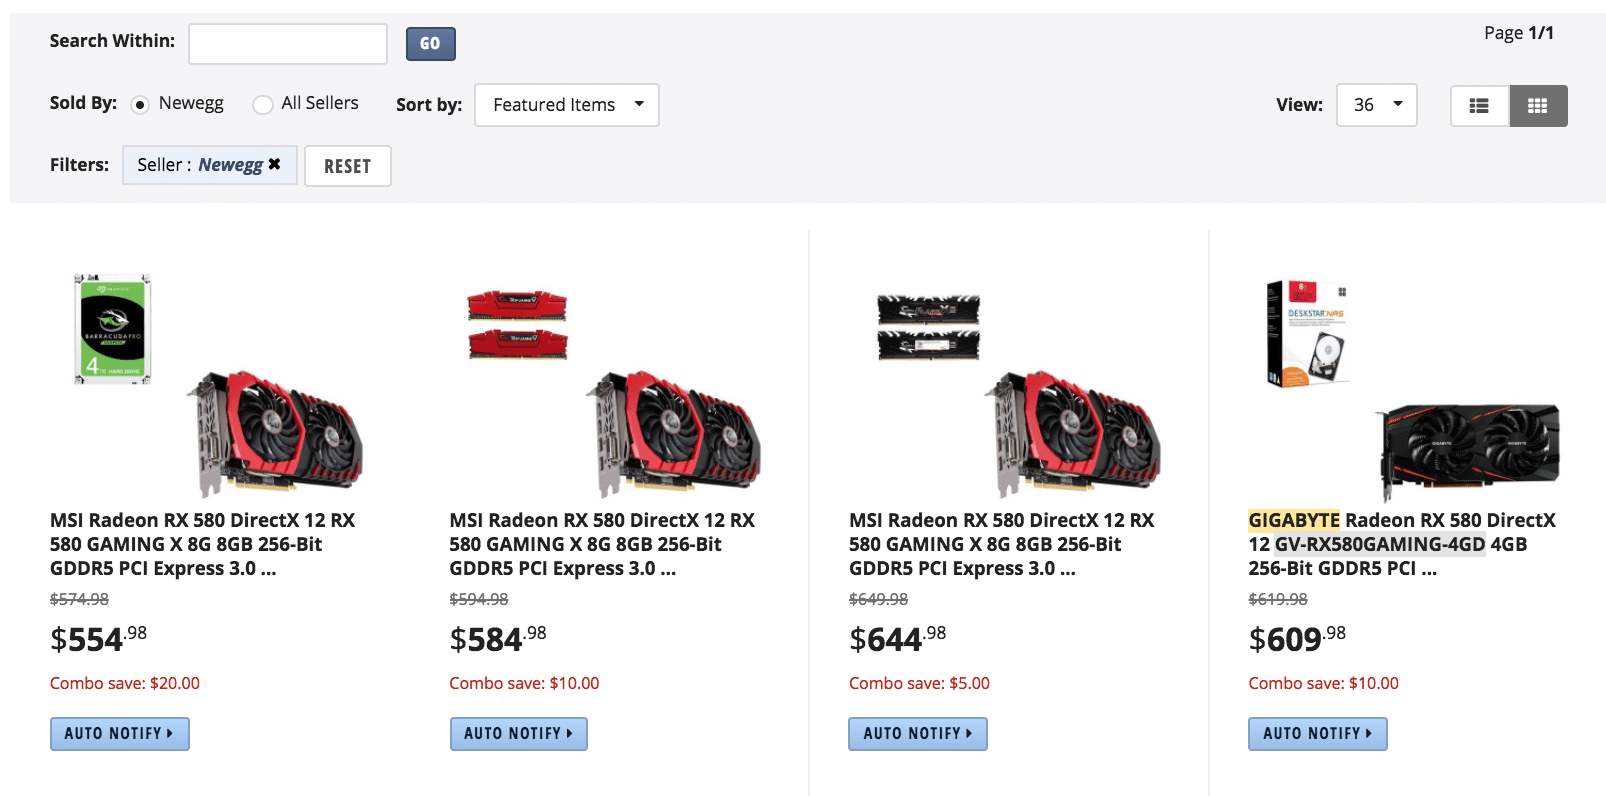 Rig And Asic Are Sold Out! Prices Increasing Daily.